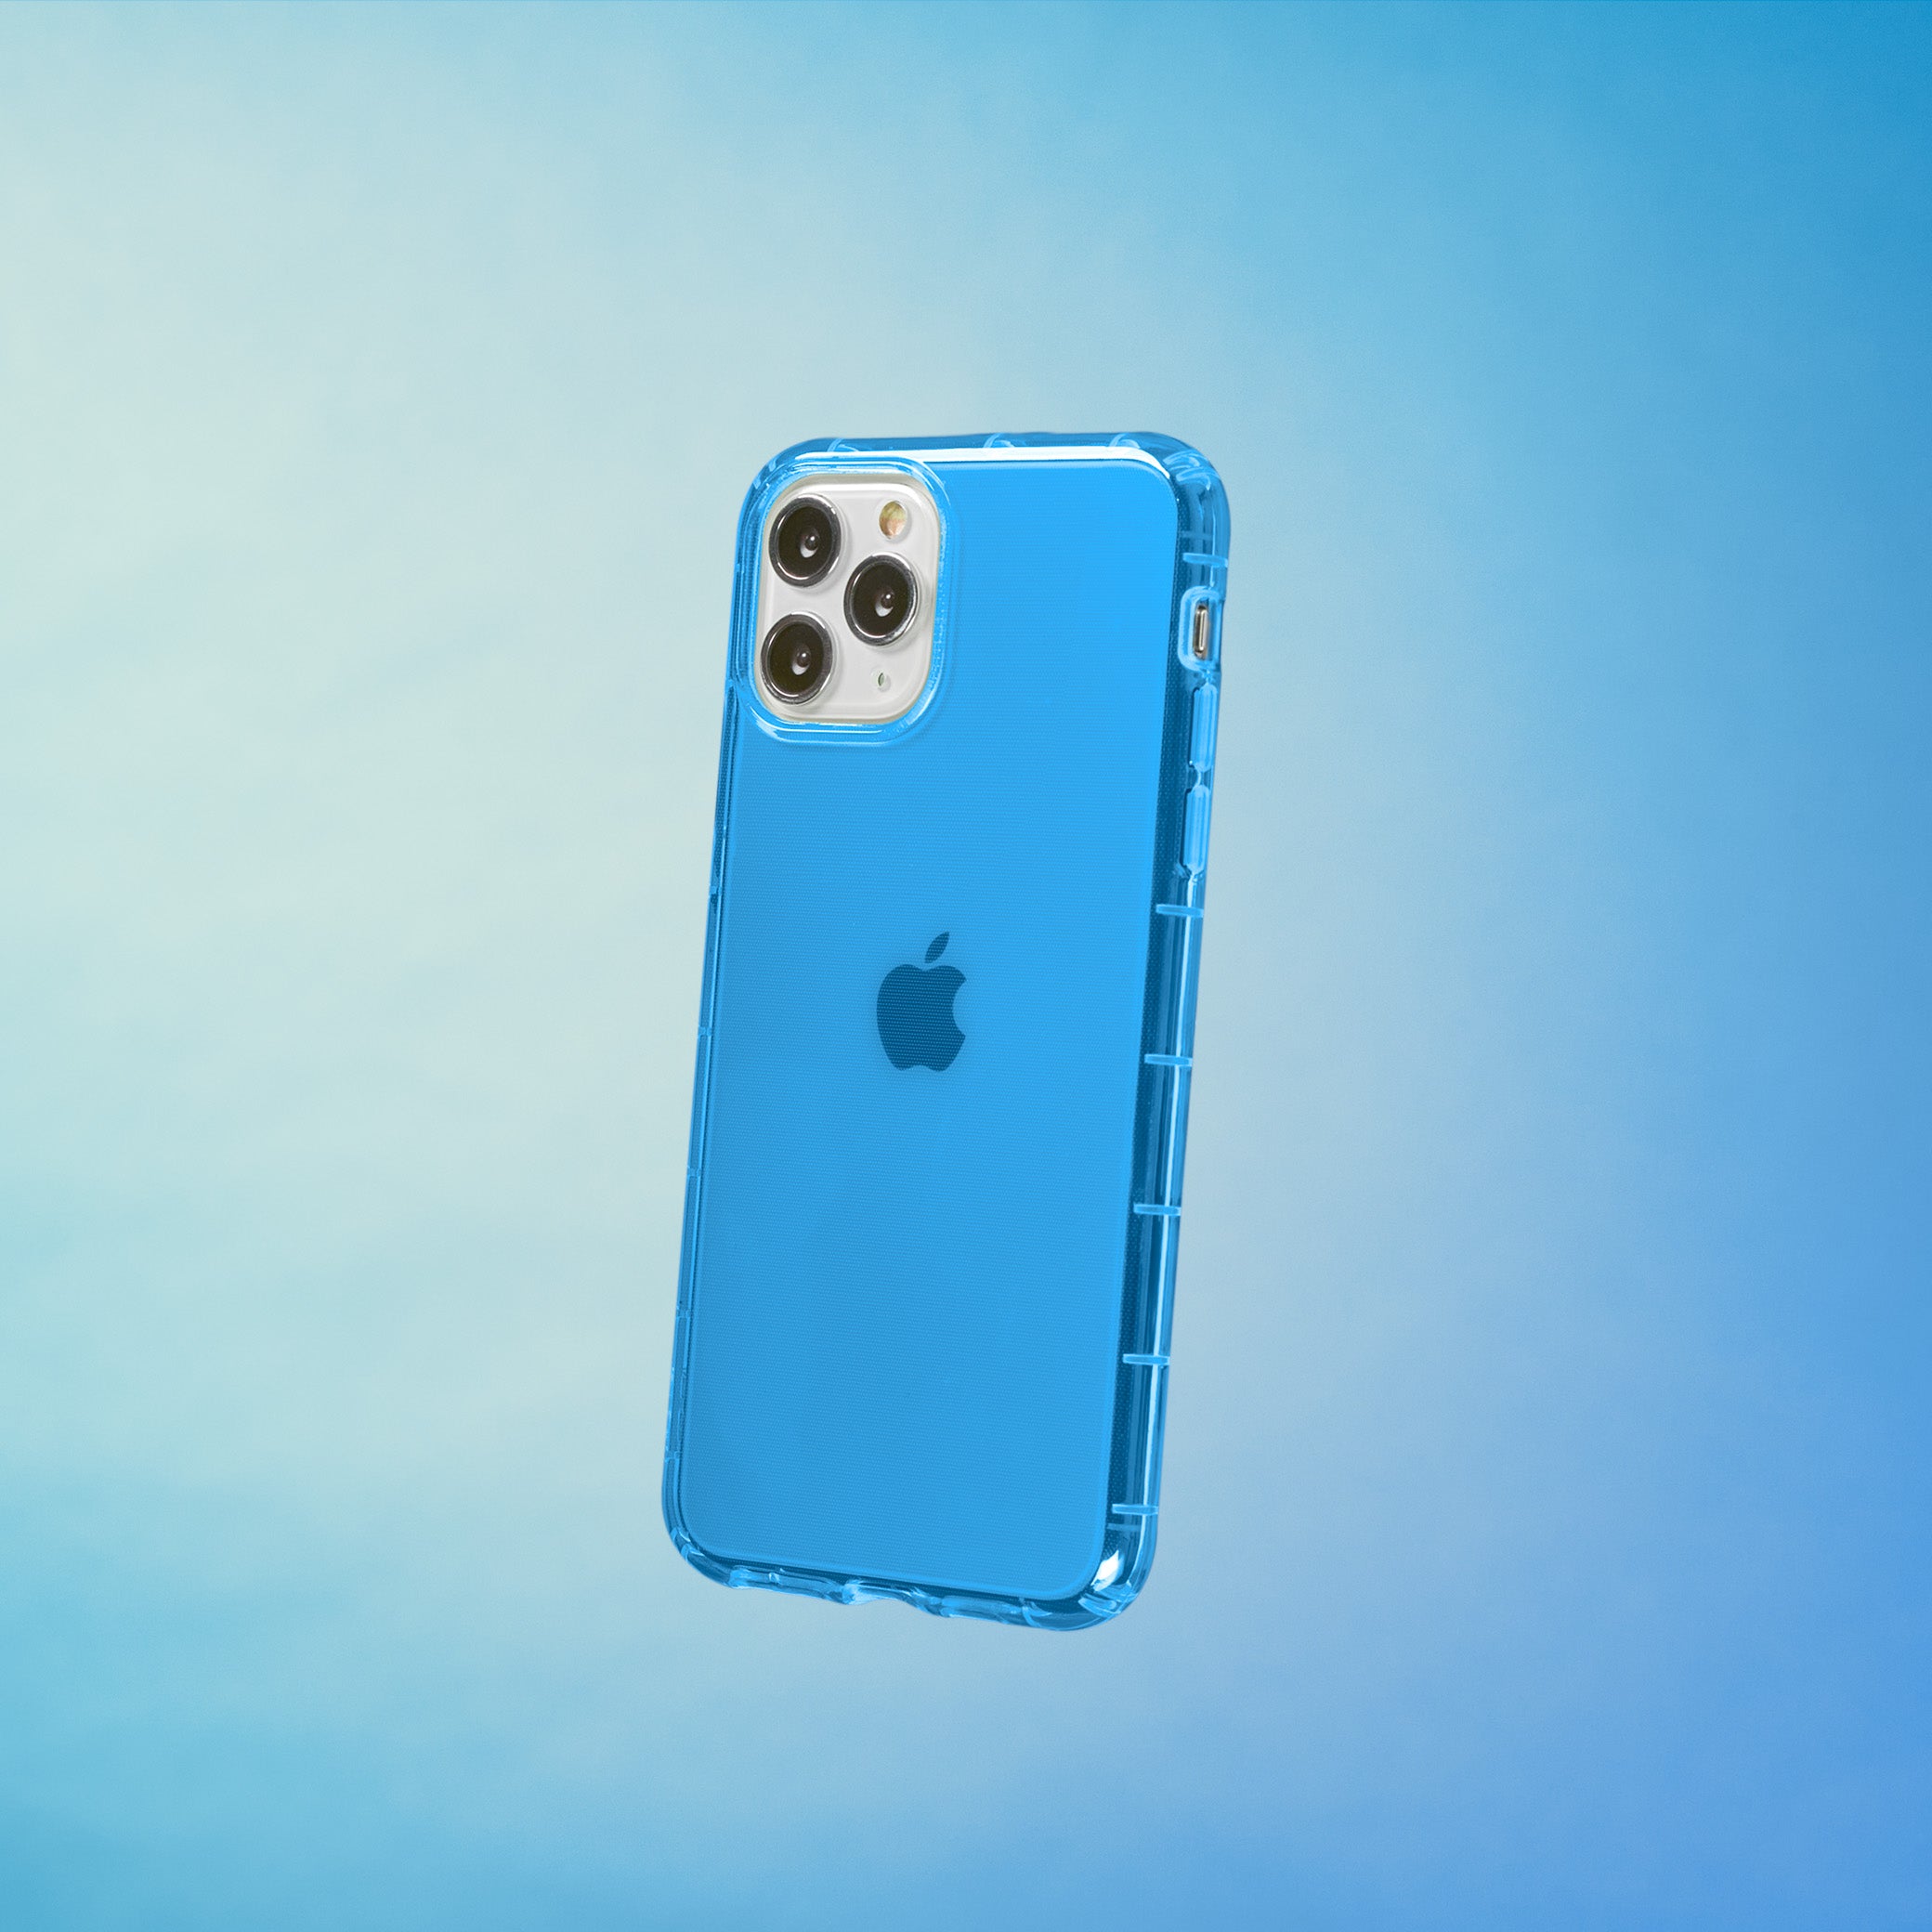 Highlighter Case for iPhone 11 Pro - Elevated Azure Blue